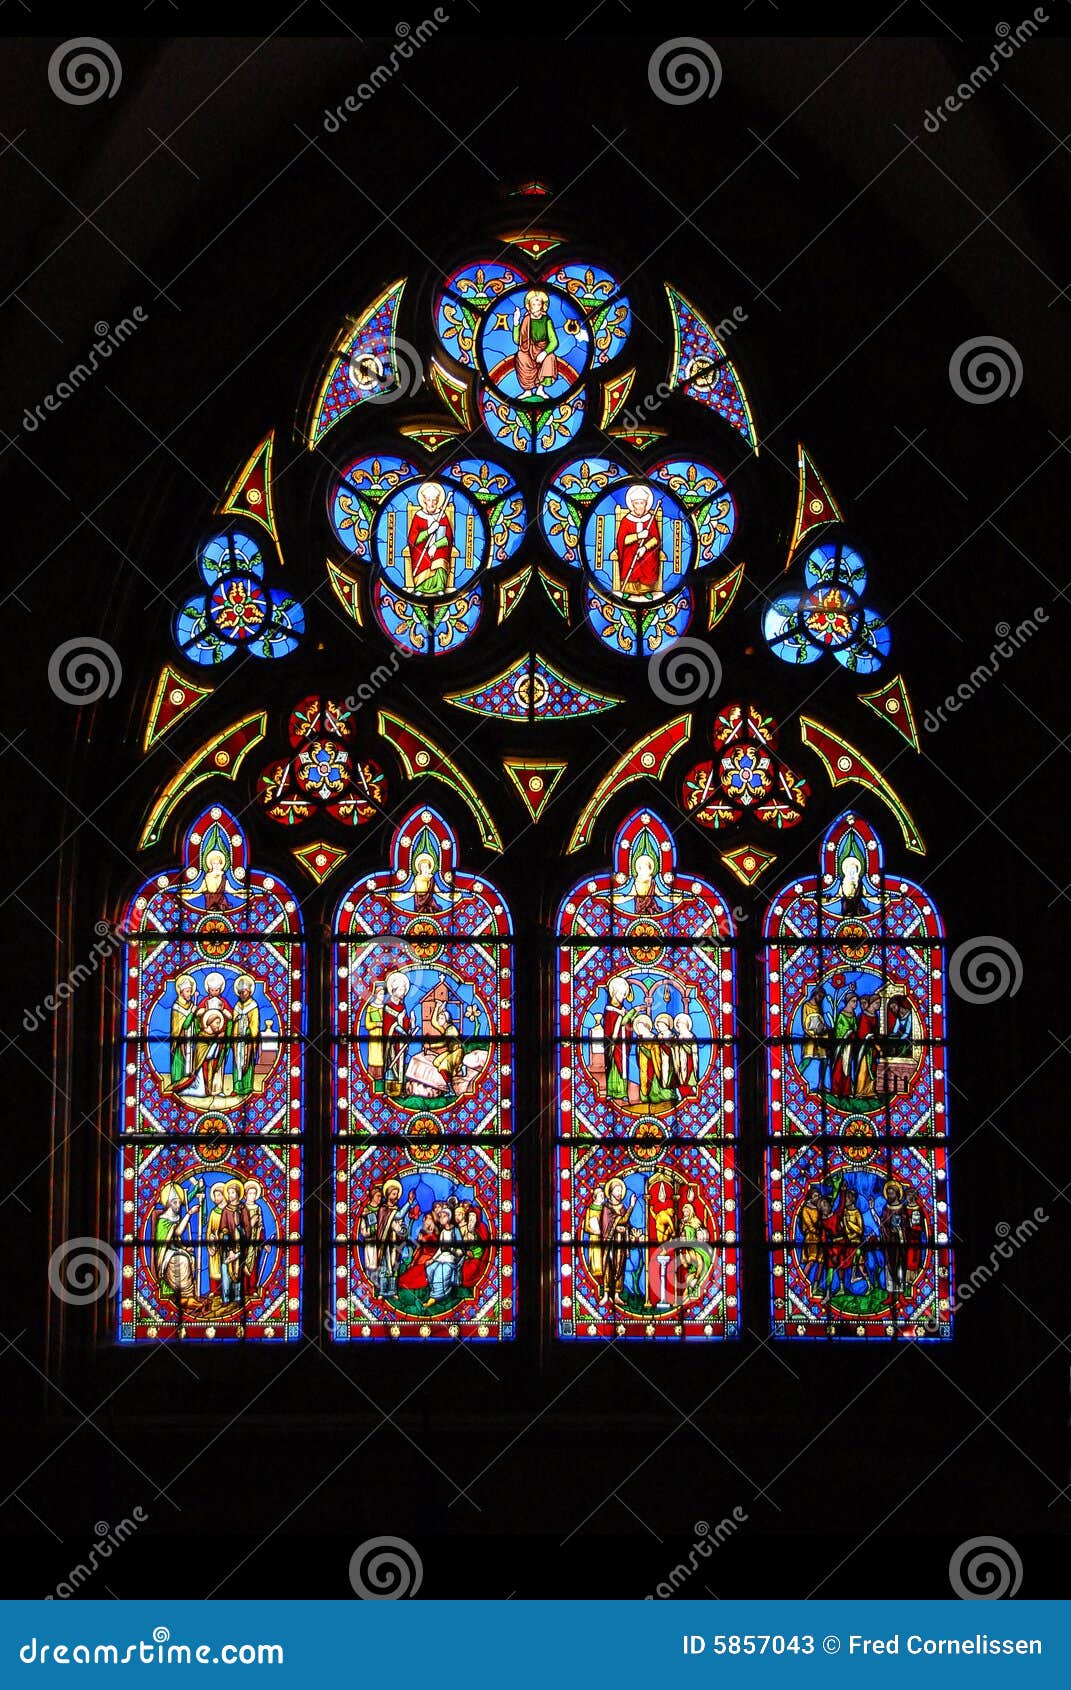 Stained Glass Of Chartres Cathedral In France Stock Image